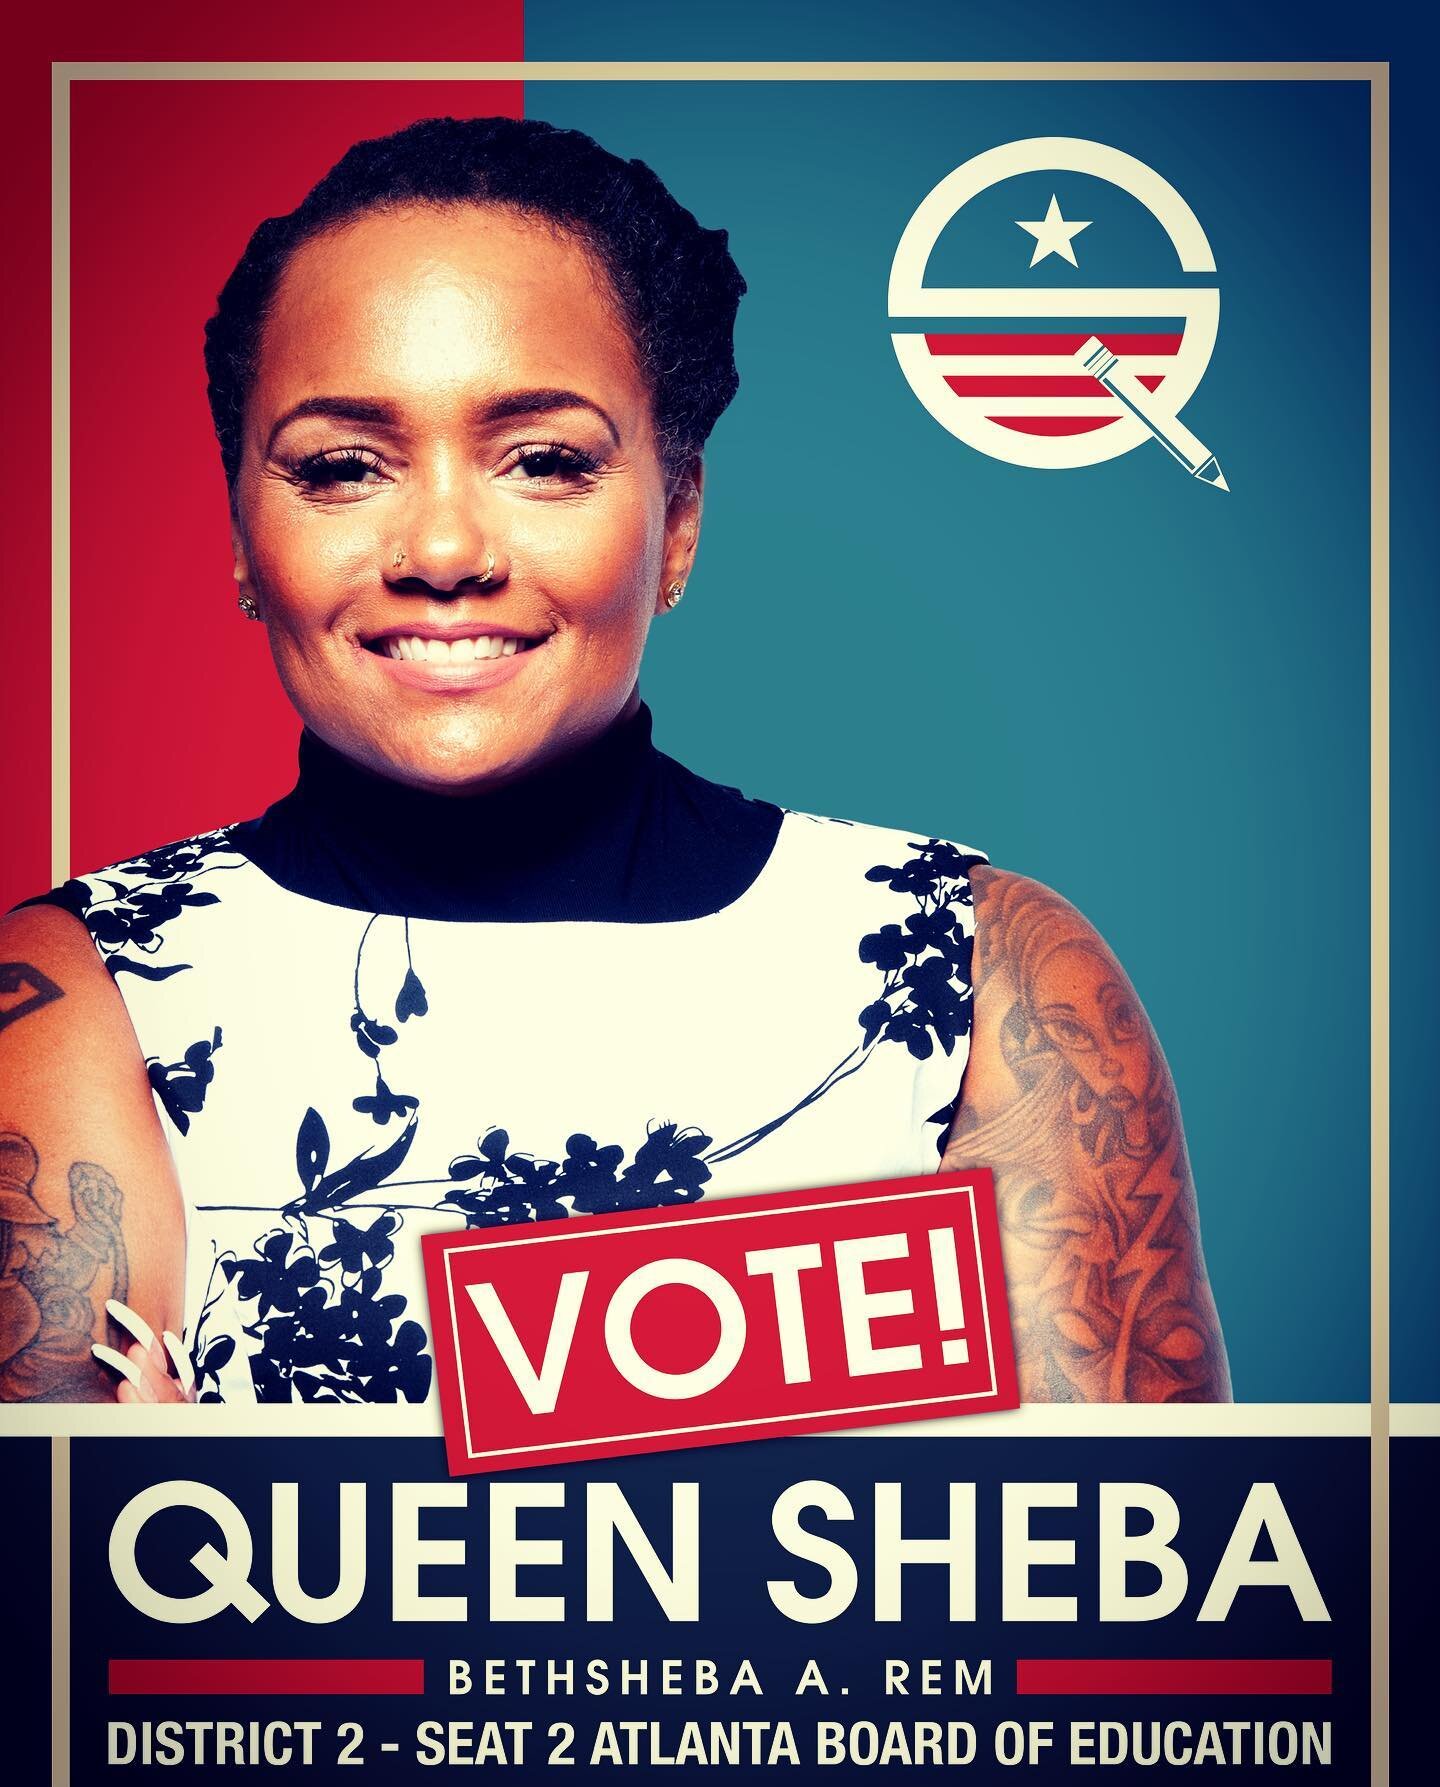 Hello Friends!

It's Queen Sheba and, as you may know, I&rsquo;m running for the Atlanta Board of Education to create positive change for our children in District 2 - SW Atlanta and I need your support!

I&rsquo;m asking a few friends to invest $100 